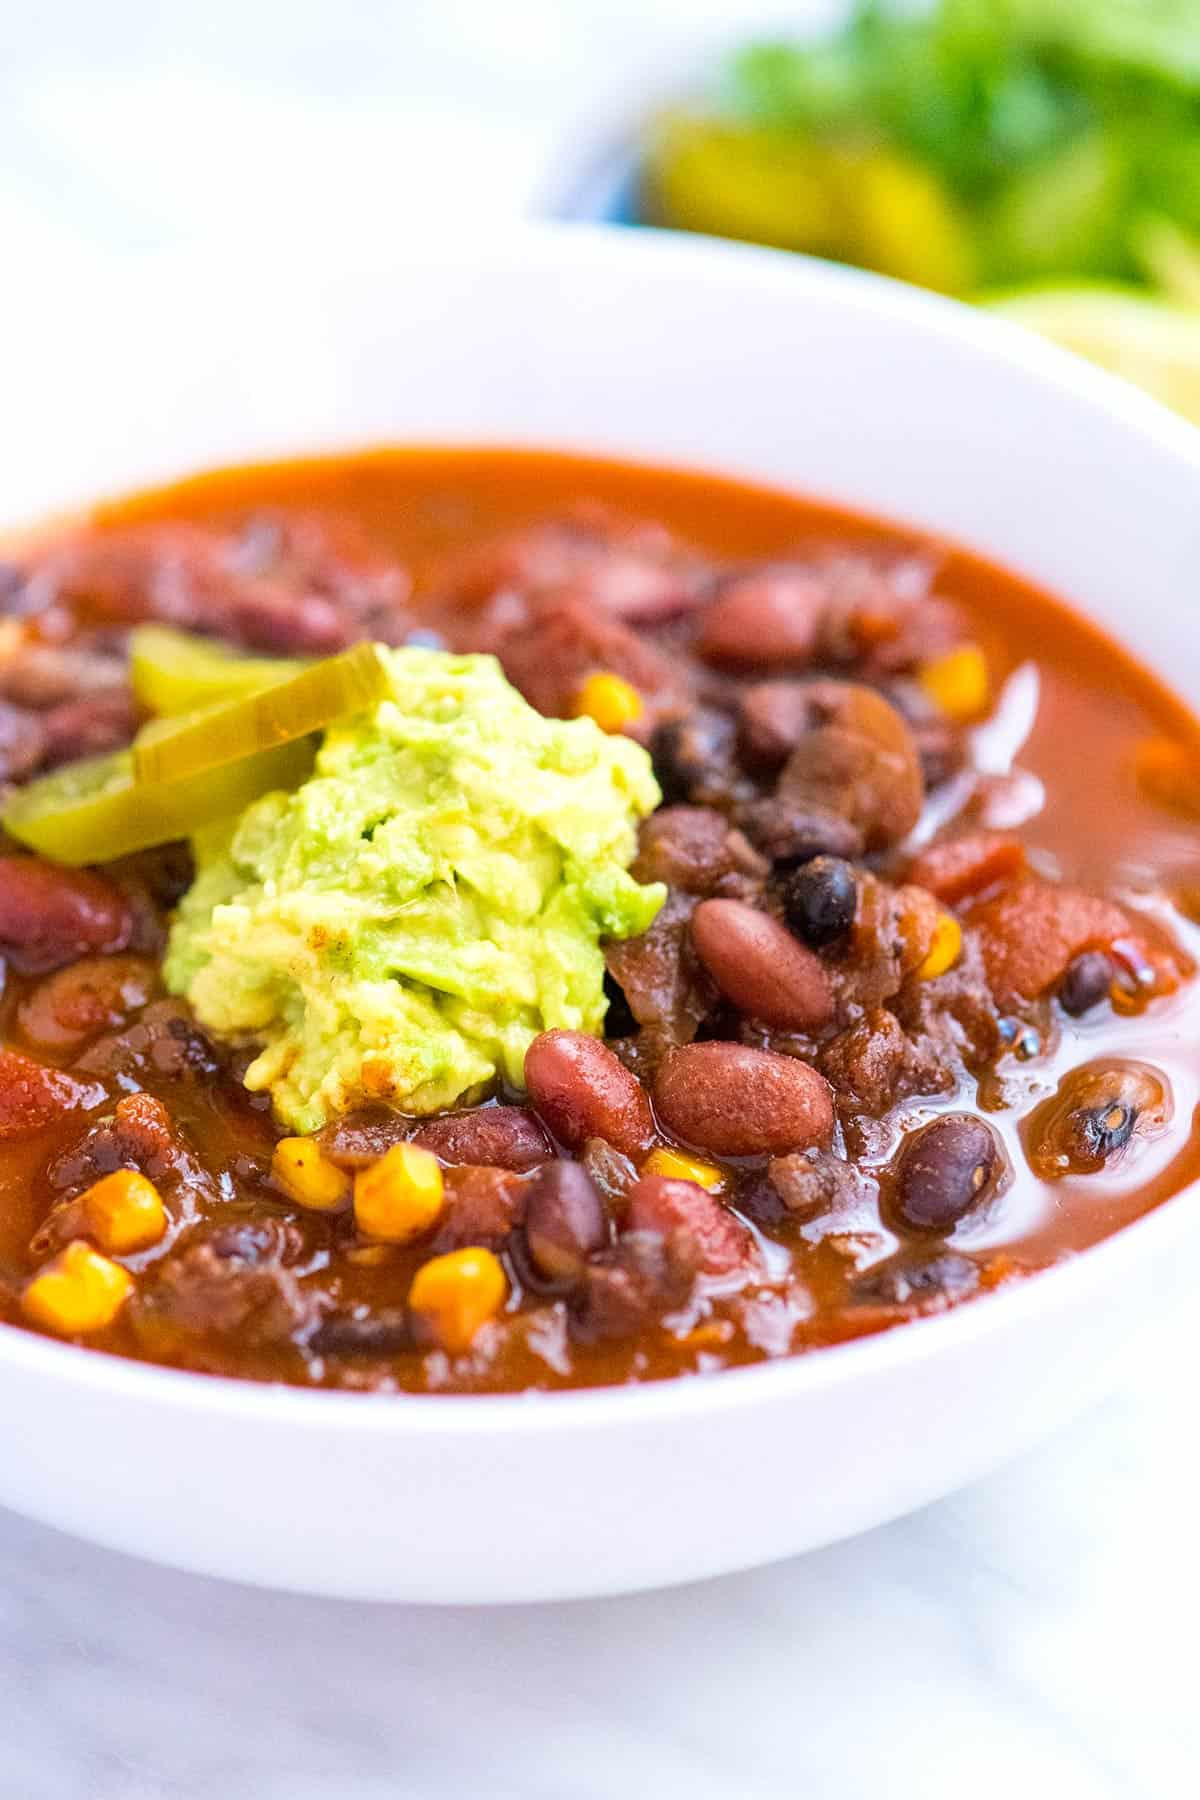 Best Canned Vegetarian Chili
 Utterly Delicious Chipotle Bean Chili Recipe